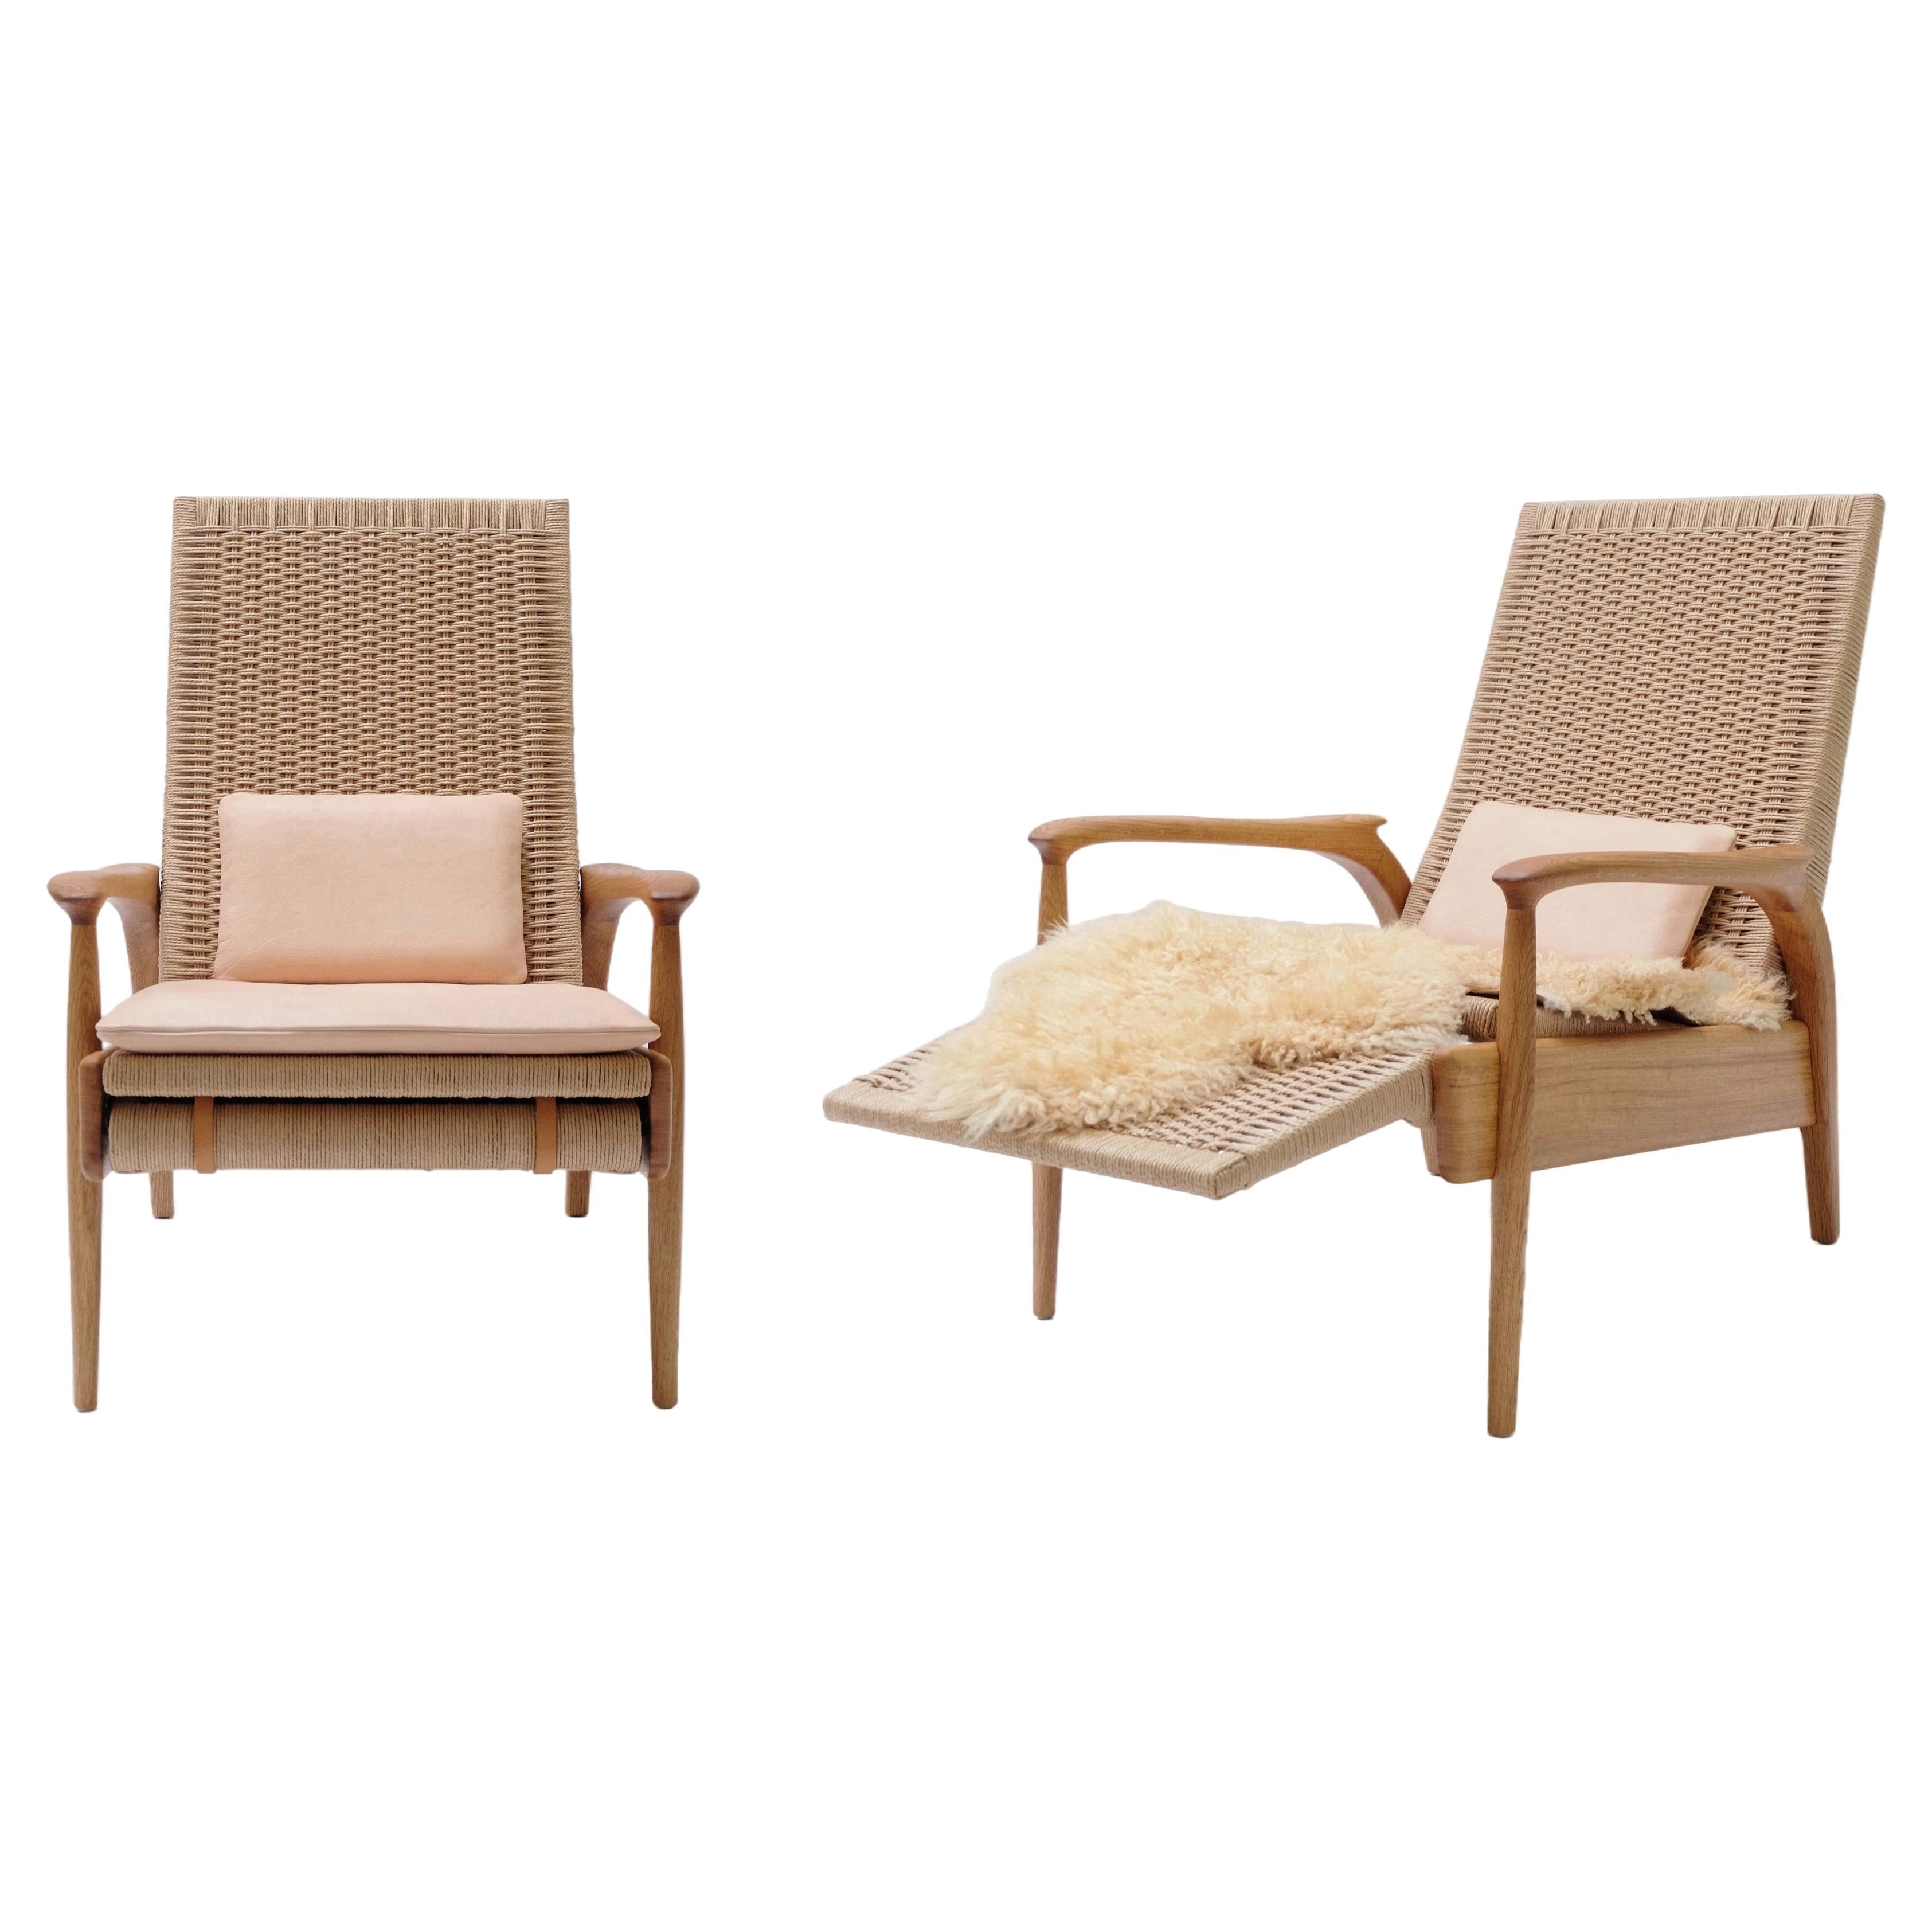 Pair of Reclining Armchairs, Solid Oak, Natural Danish Cord, Leather Cushions For Sale